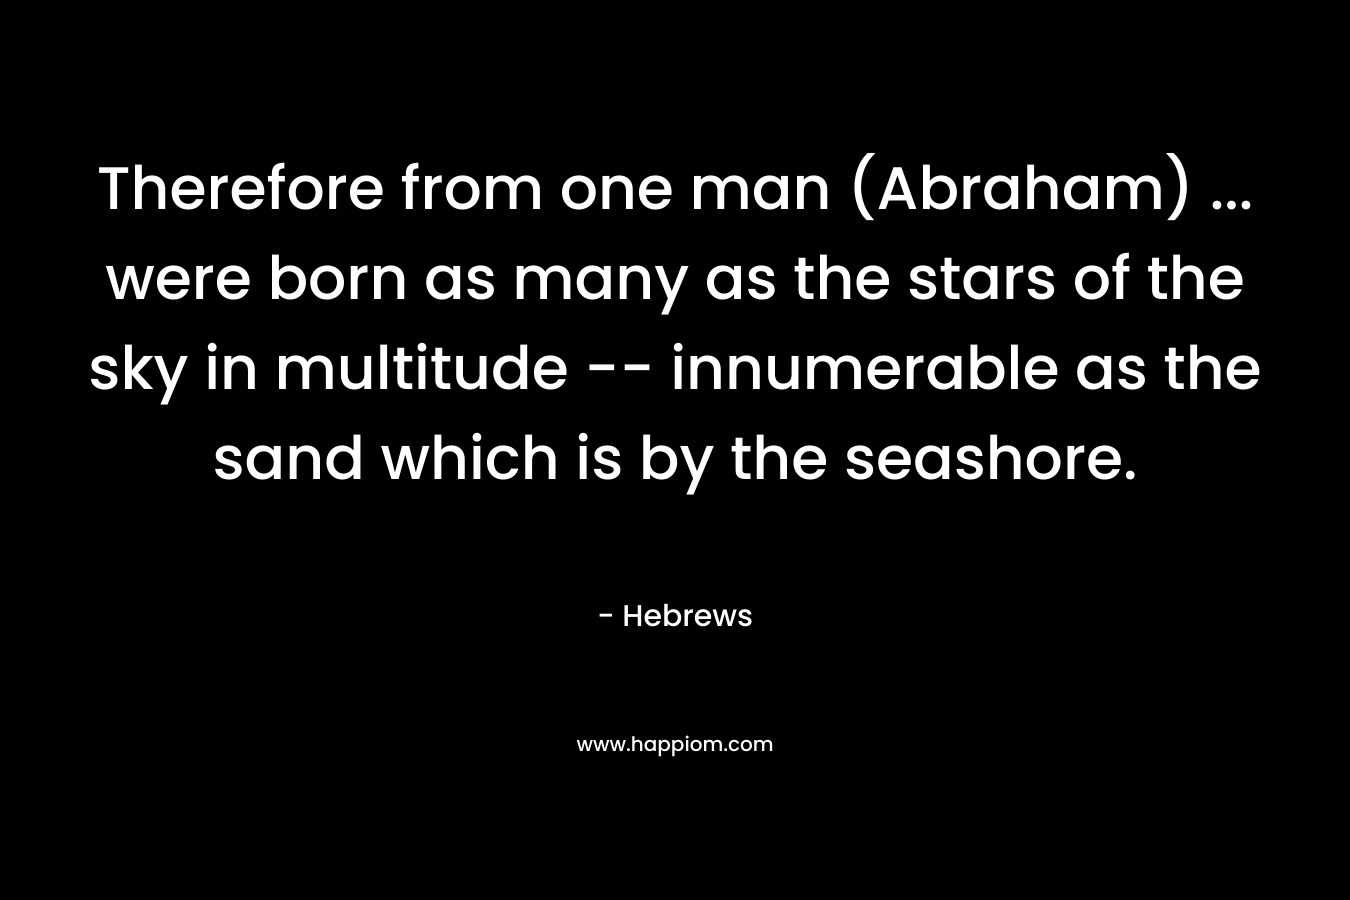 Therefore from one man (Abraham) ... were born as many as the stars of the sky in multitude -- innumerable as the sand which is by the seashore.